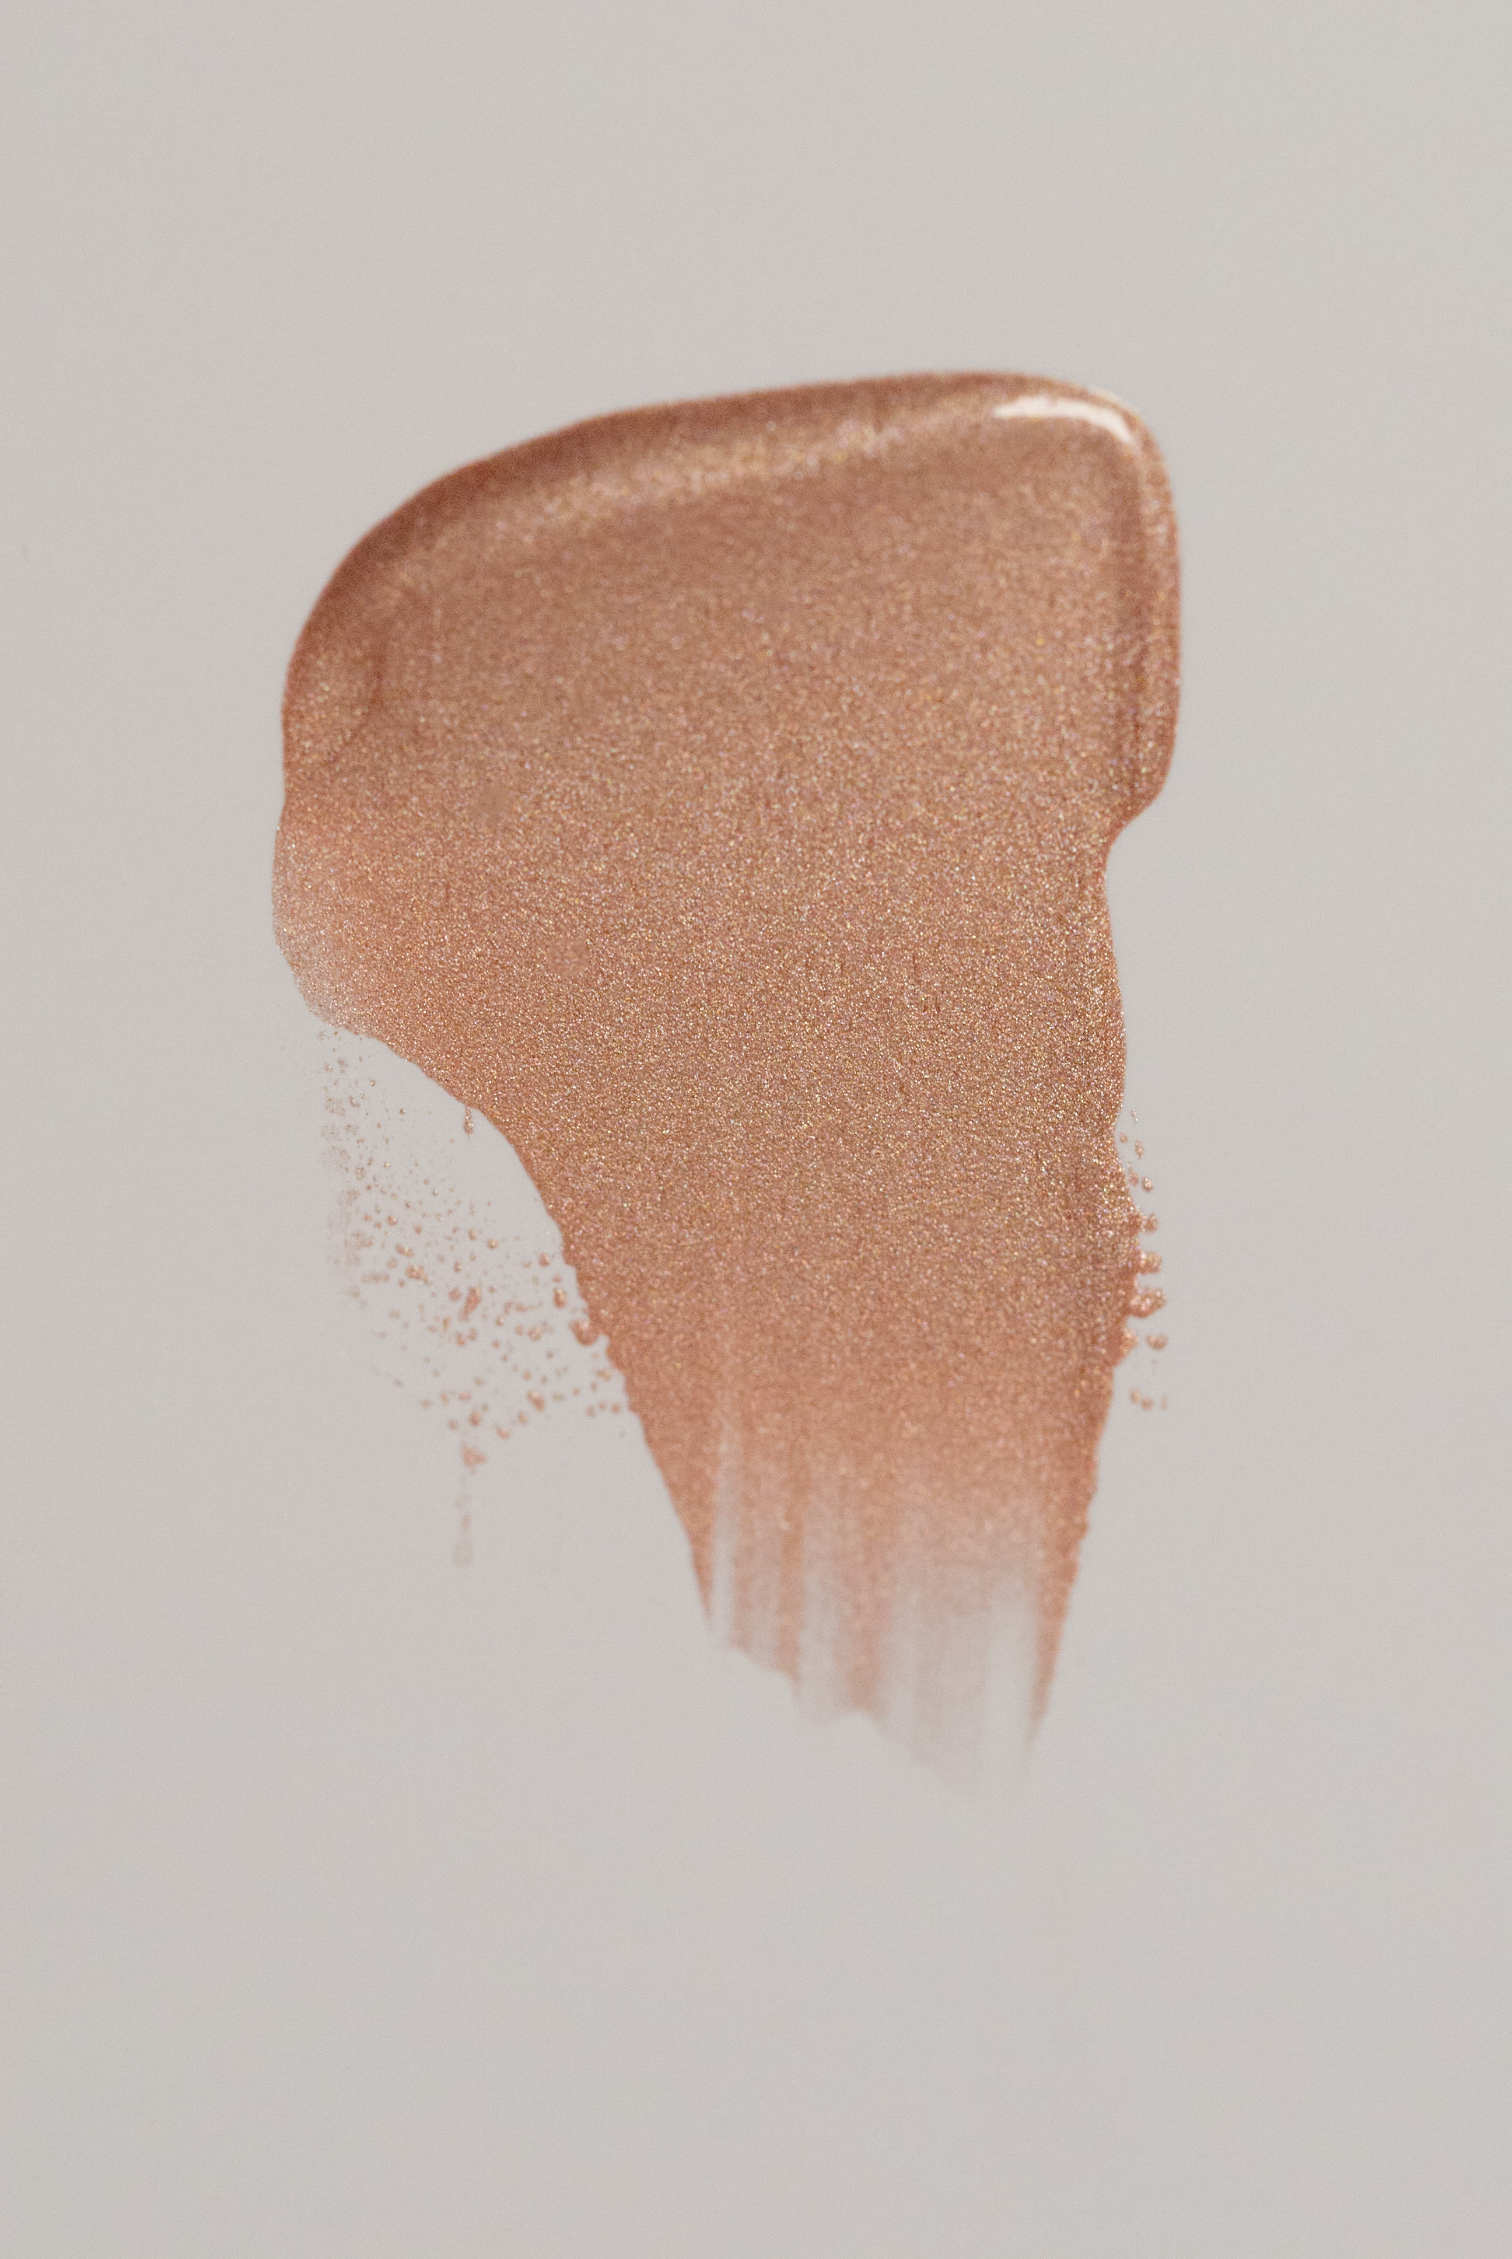 CLE Cosmetics ESSENCE MOONLIGHTER CUSHION Color Swatch in Copper Rose.